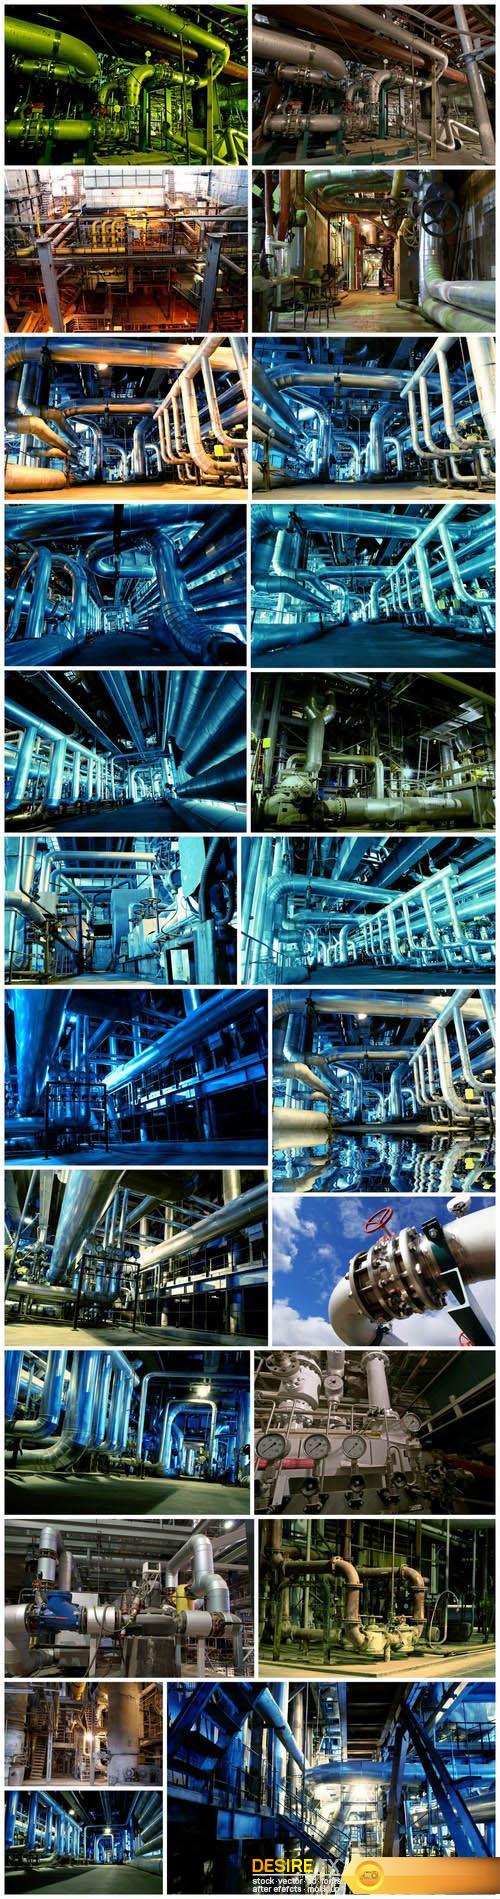 Pipes, tubes, machinery and steam turbine at a power plant - 23xUHQ JPEG